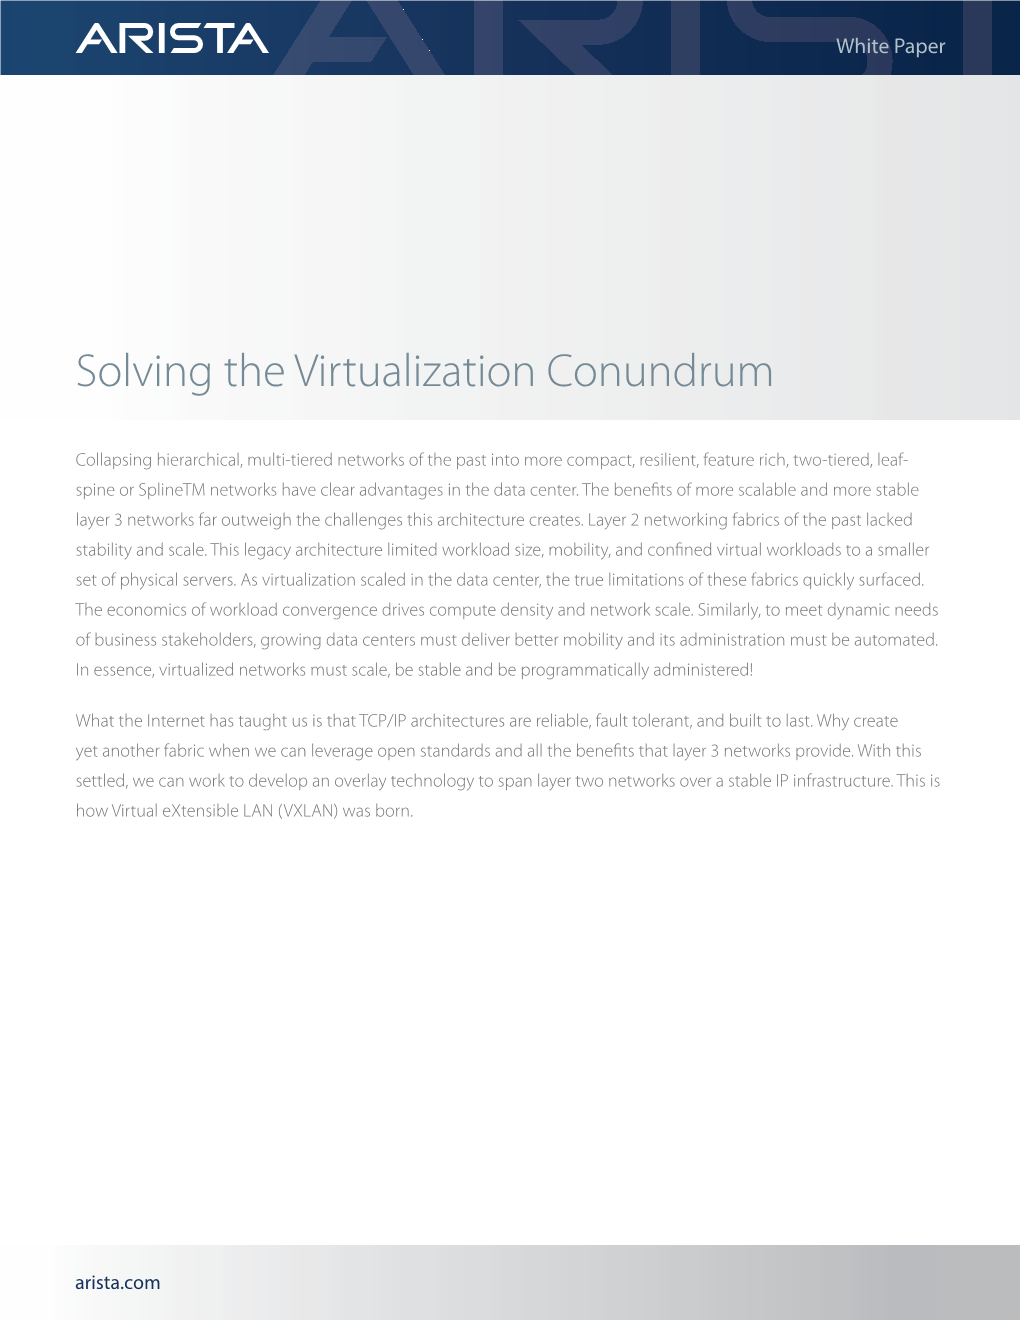 Solving the Virtualization Conundrum